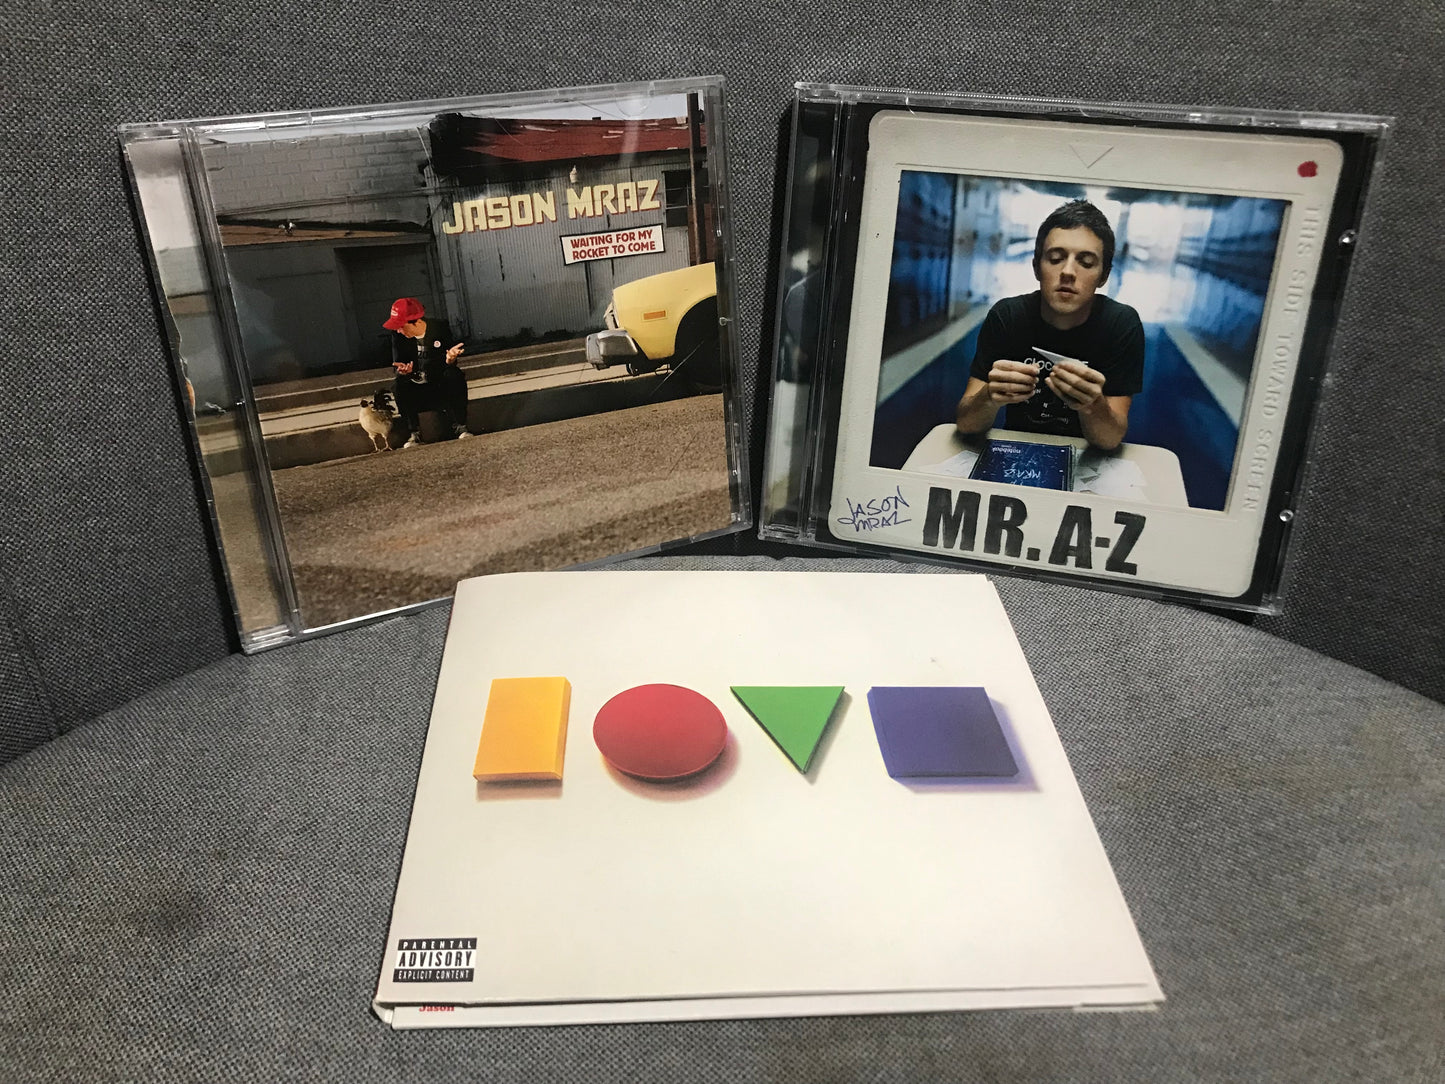 Jason Mraz 3 CDs -- "Waiting for My Rocket to Come" (2002), "Mr. A-Z" (2005), "LOVE" (2012)